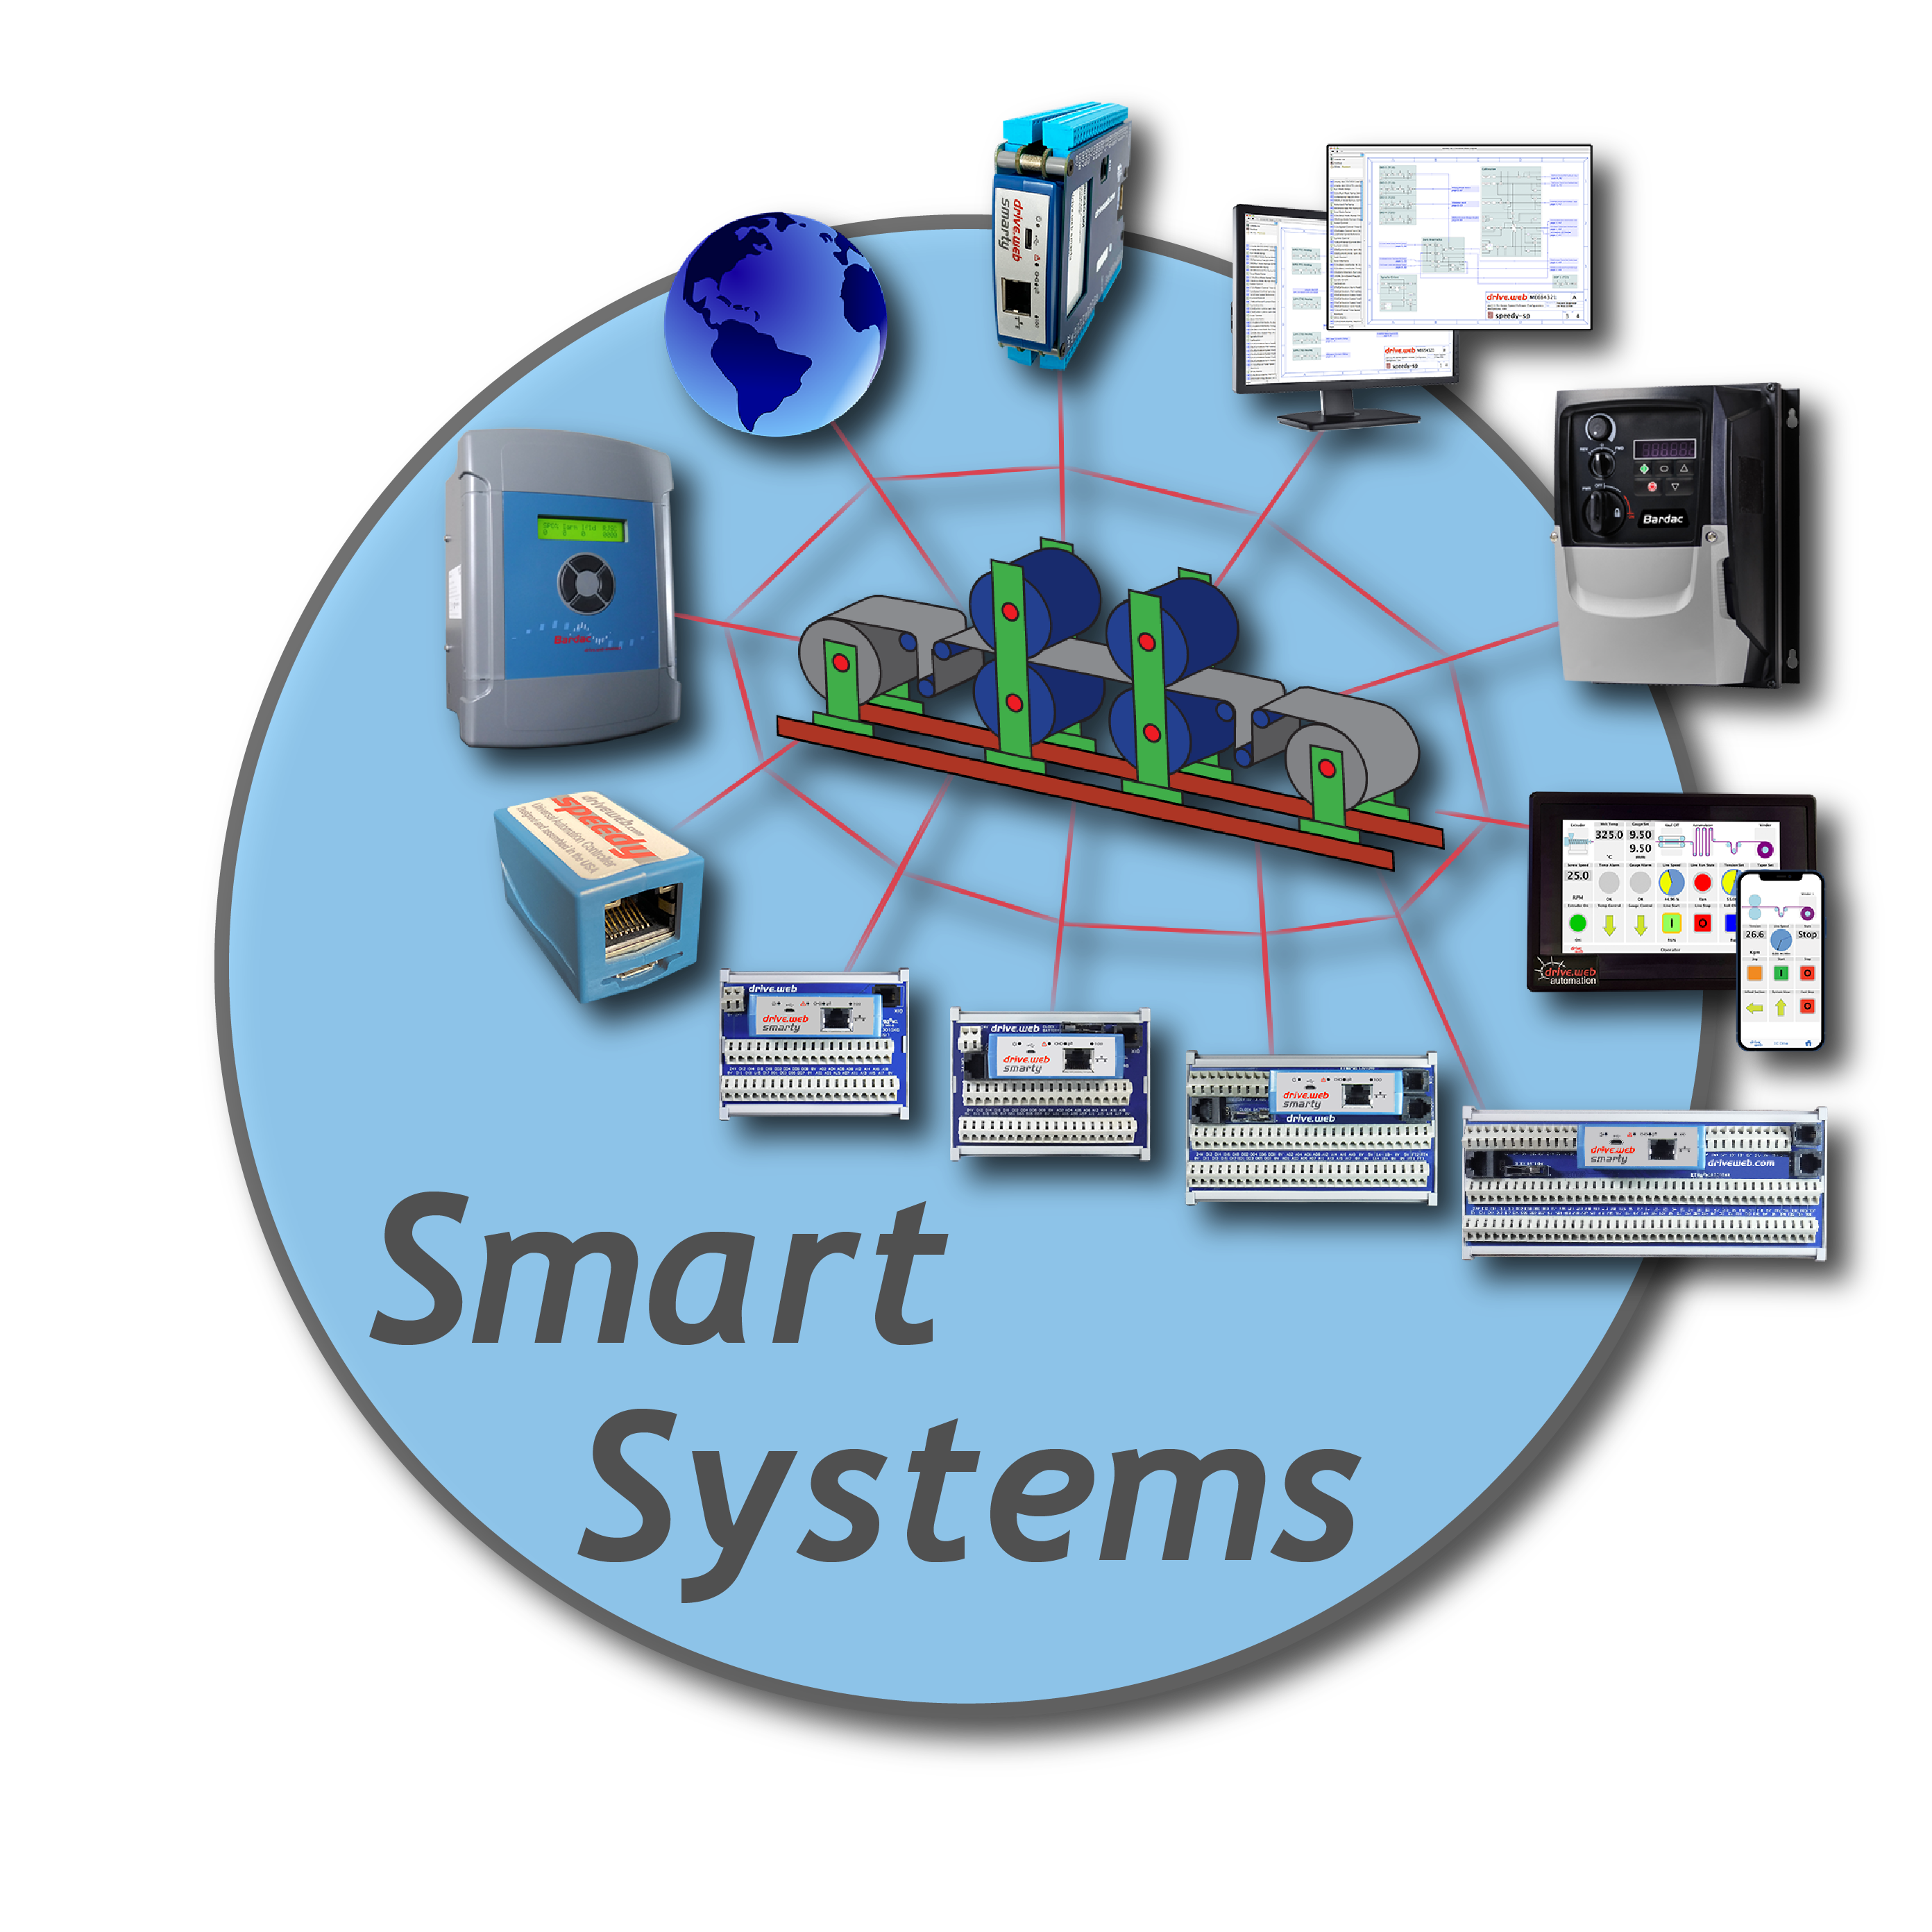 Design &amp; build complete systems of any size or complexity